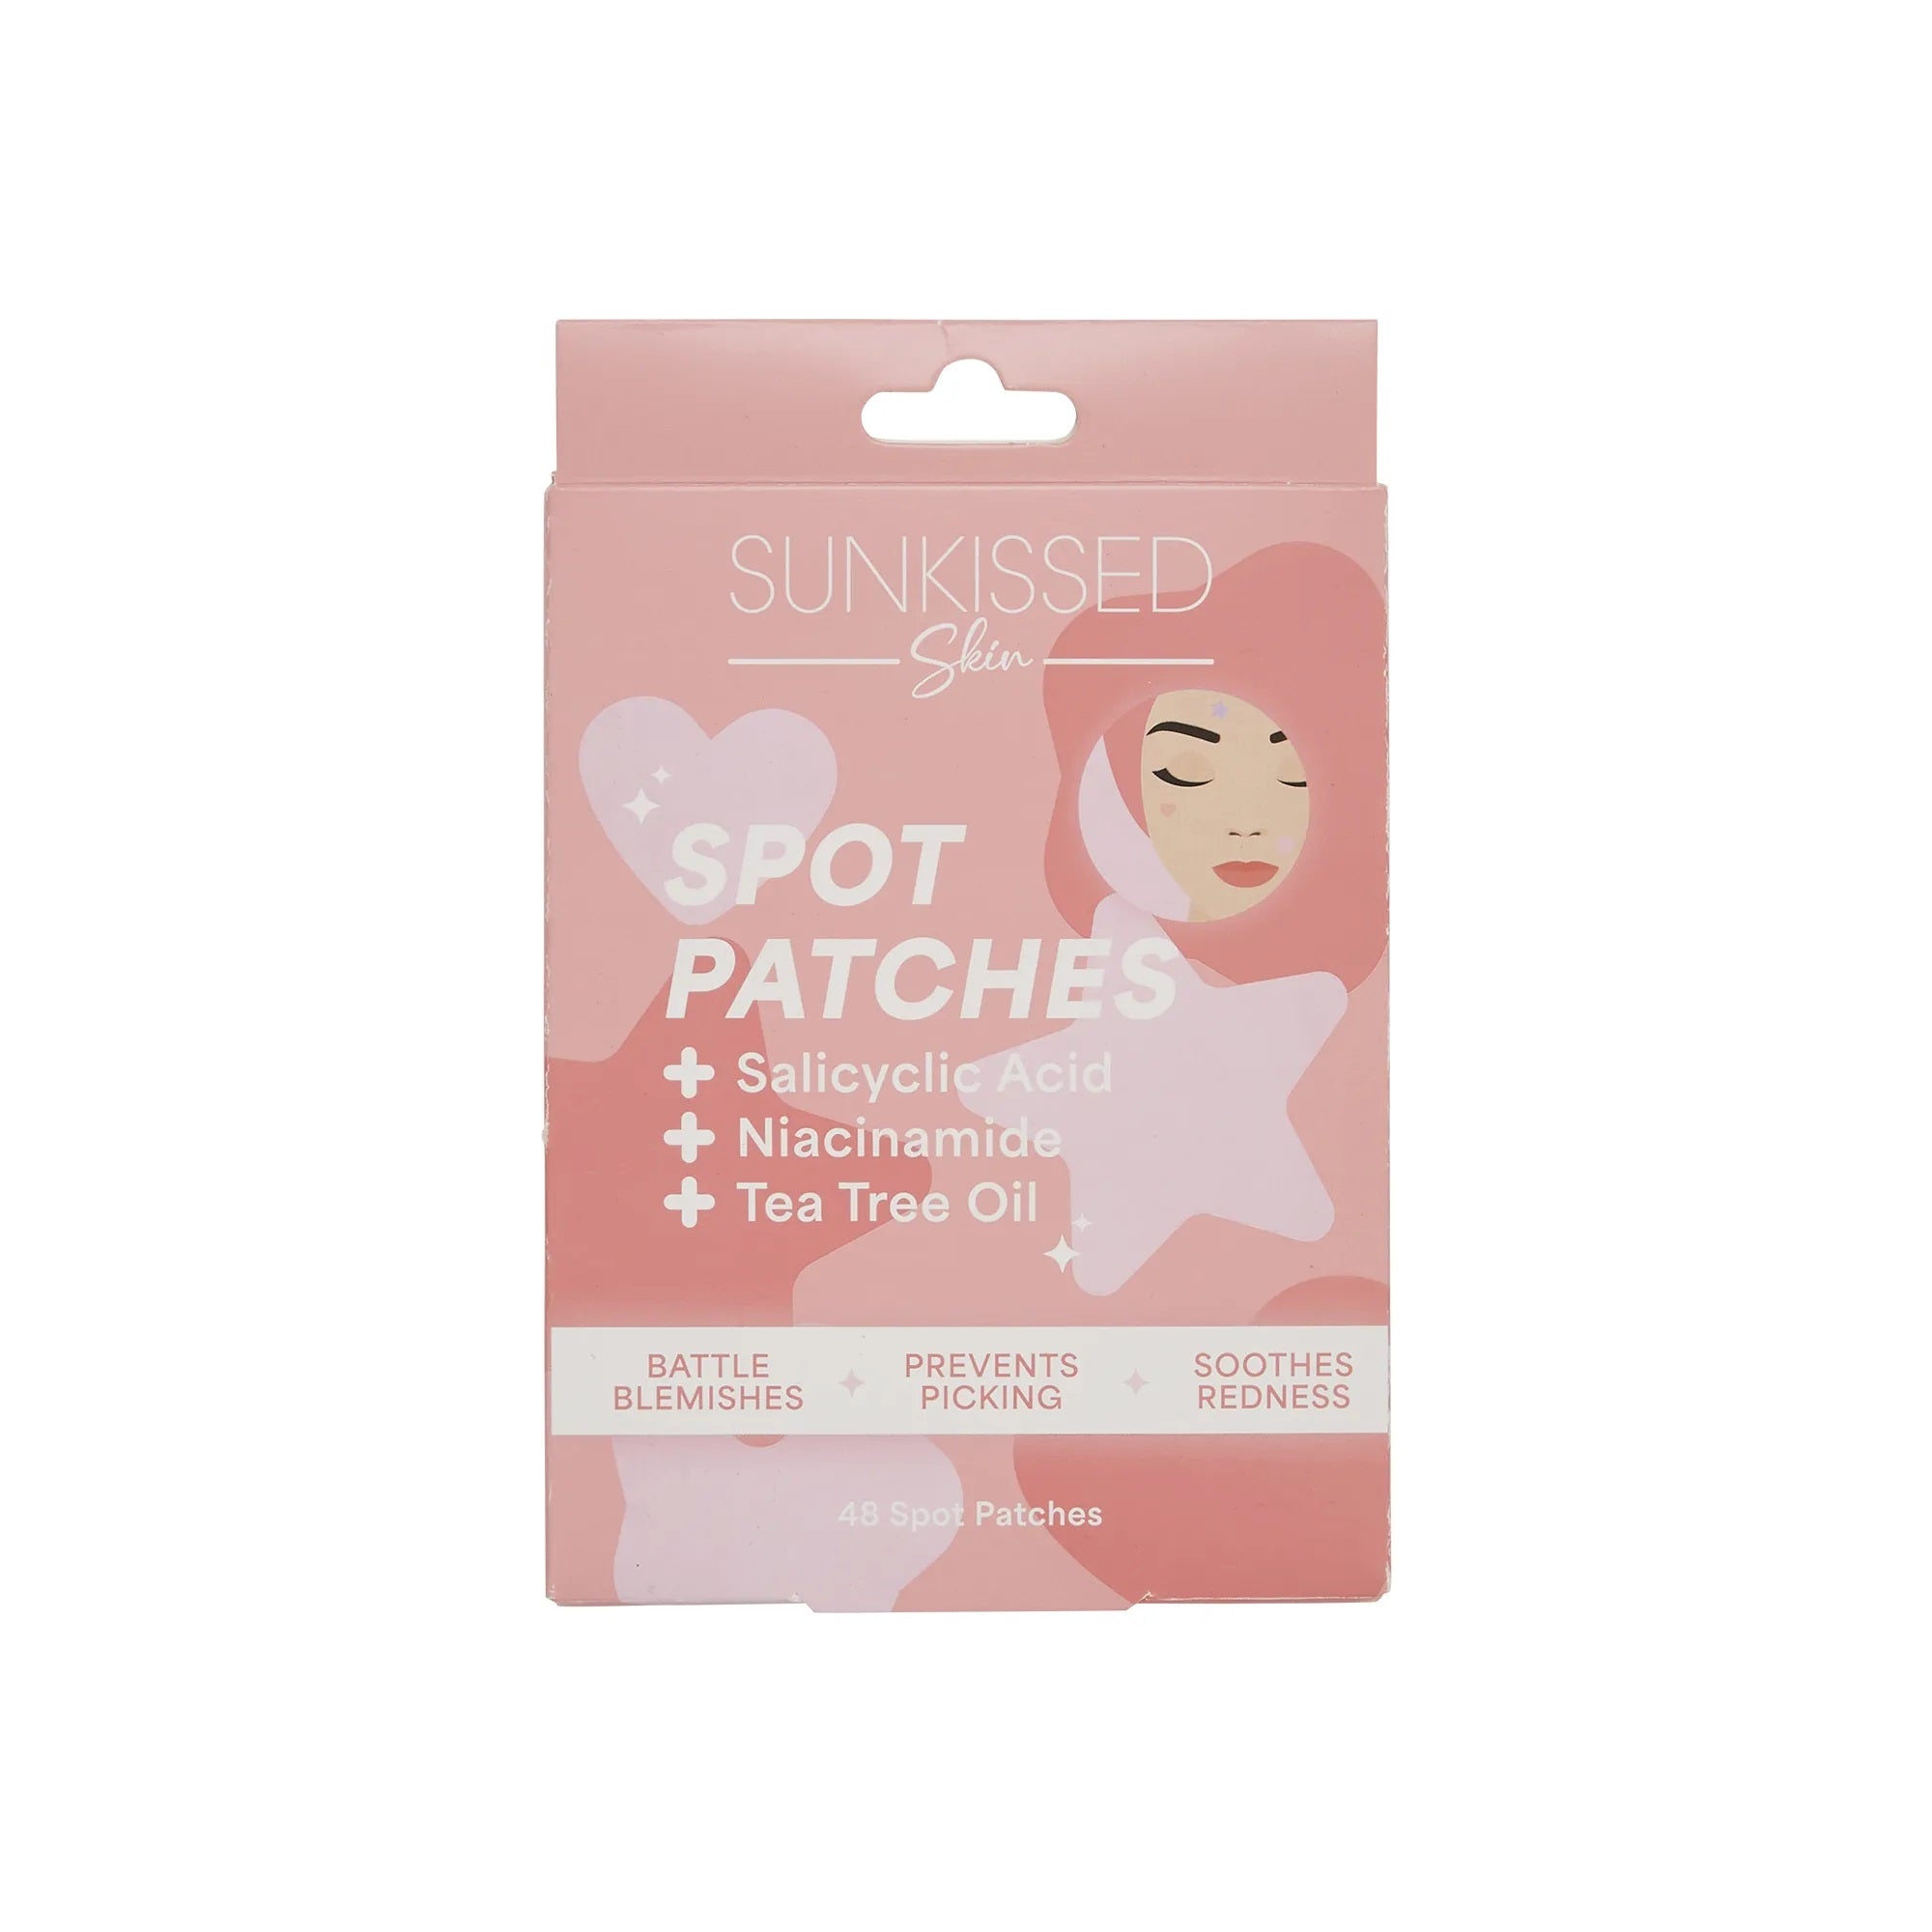 Sunkissed Skin 48 Spot Patches